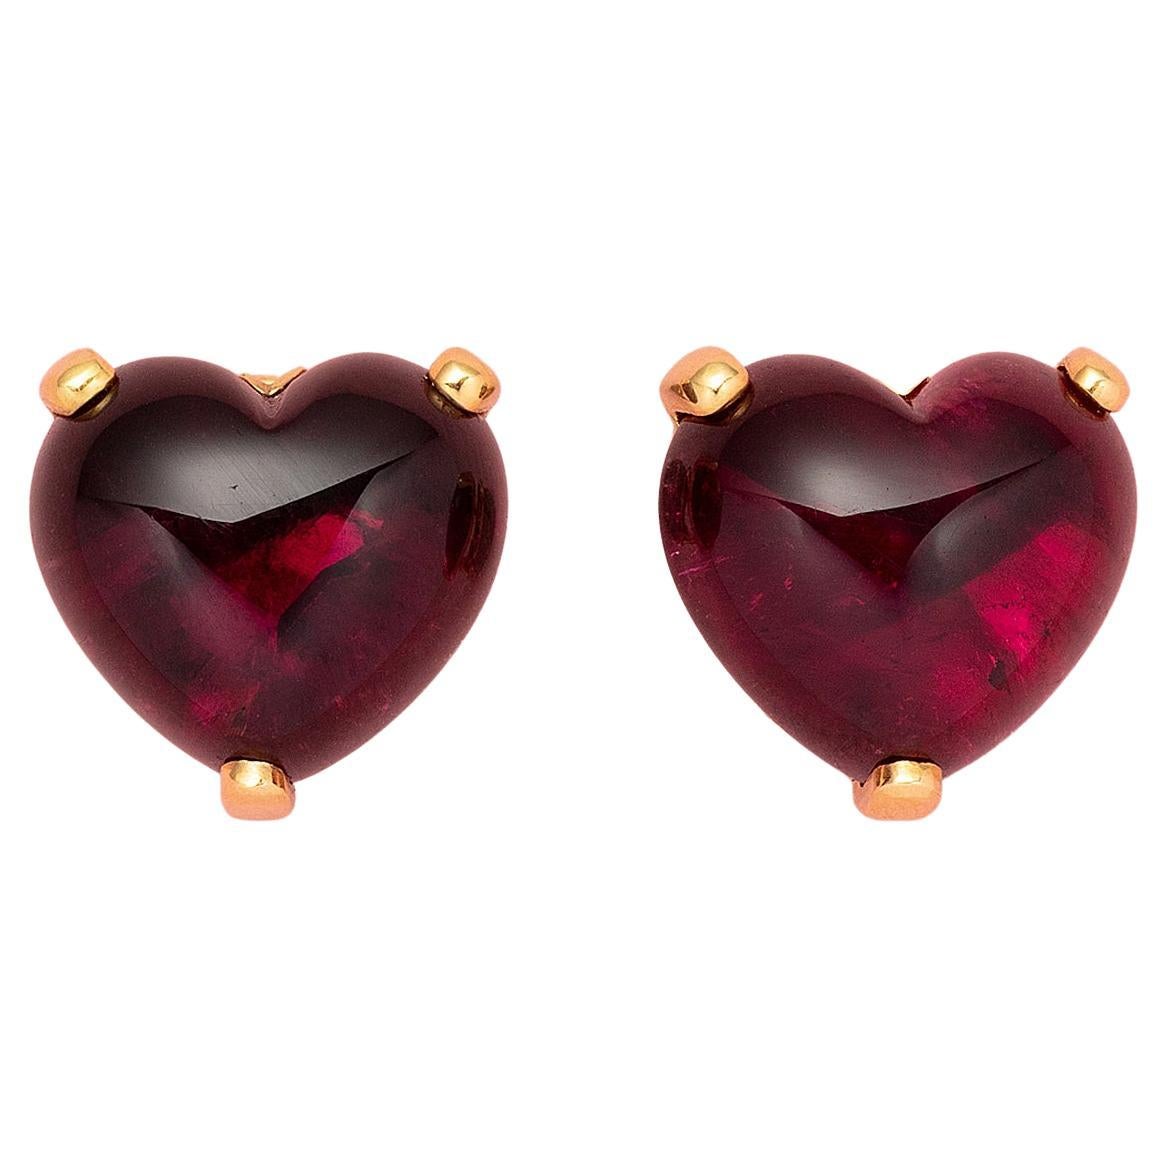 A Pair of 18 Carat Gold Heart Earrings with Pink Tourmalines